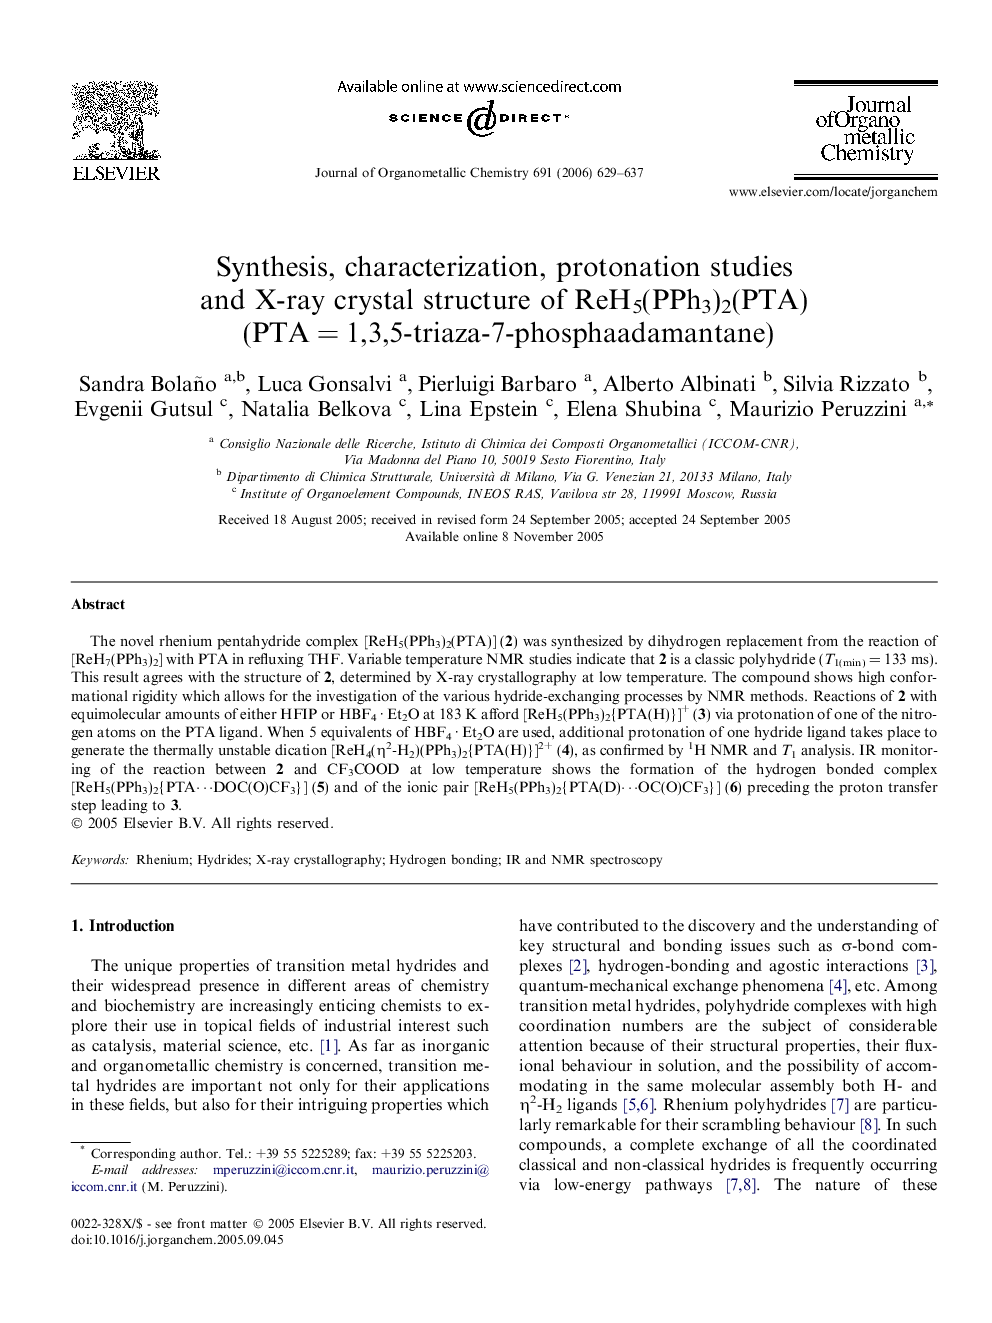 Synthesis, characterization, protonation studies and X-ray crystal structure of ReH5(PPh3)2(PTA) (PTA = 1,3,5-triaza-7-phosphaadamantane)